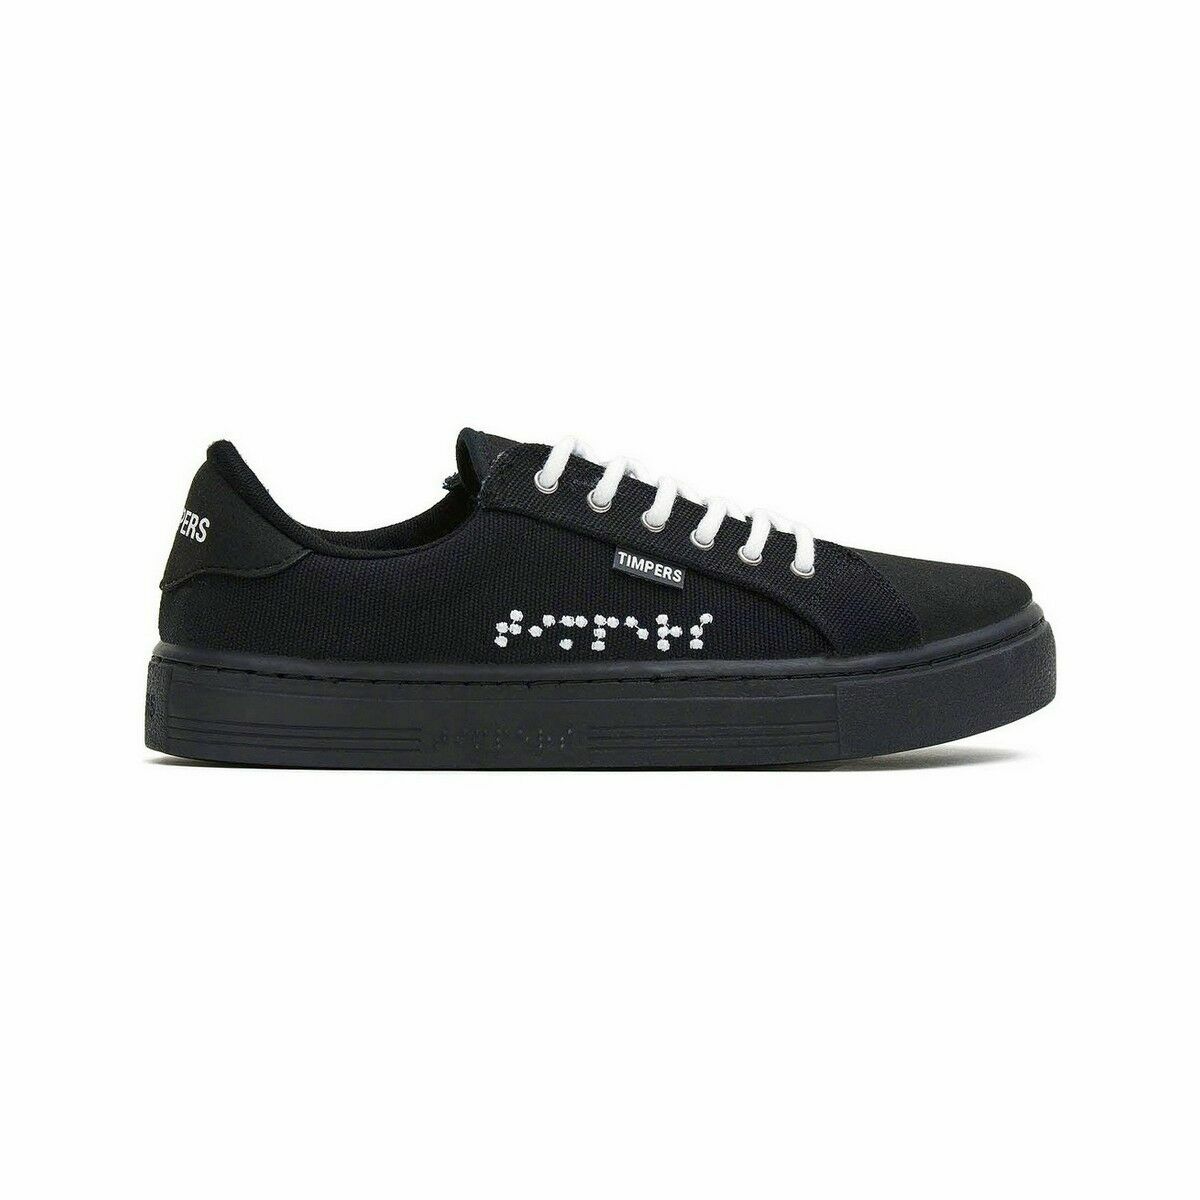 Ténis Casual Timpers Vulcan - negro - 